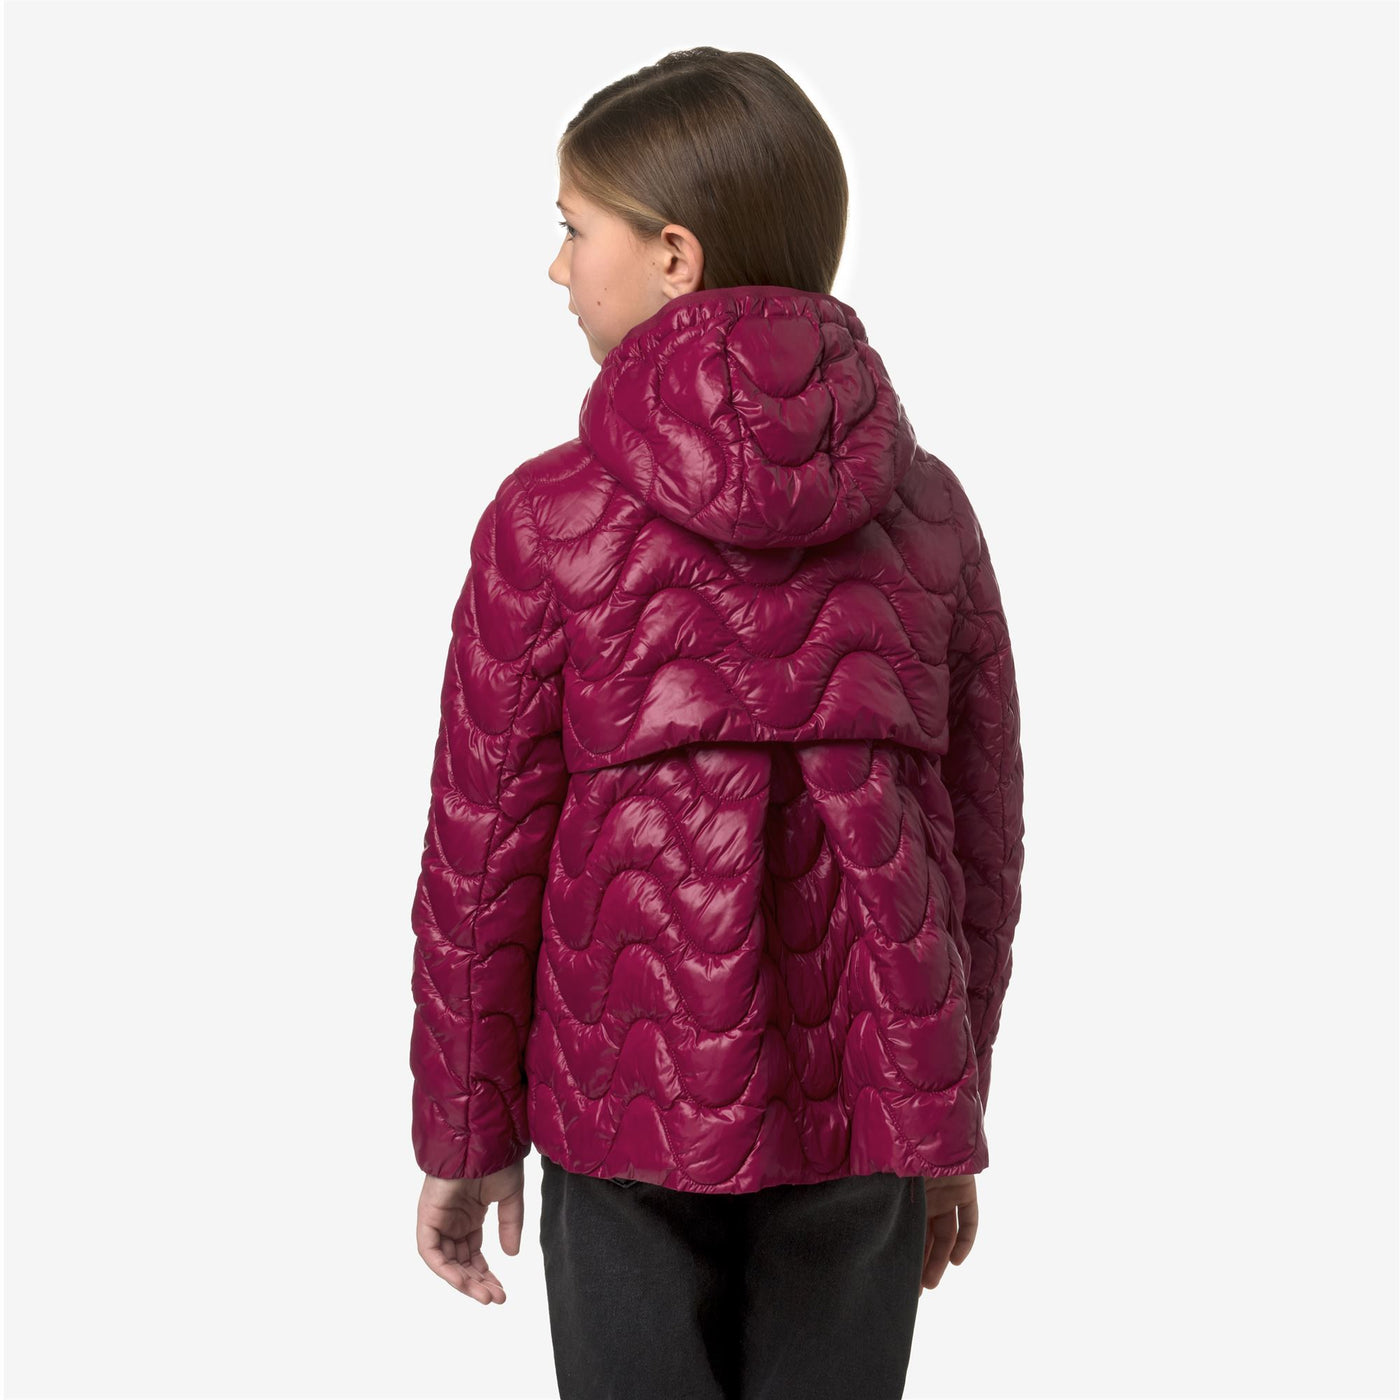 Jackets Girl P. MADLAINE QUILTED WARM Short RED DK Dressed Front Double		